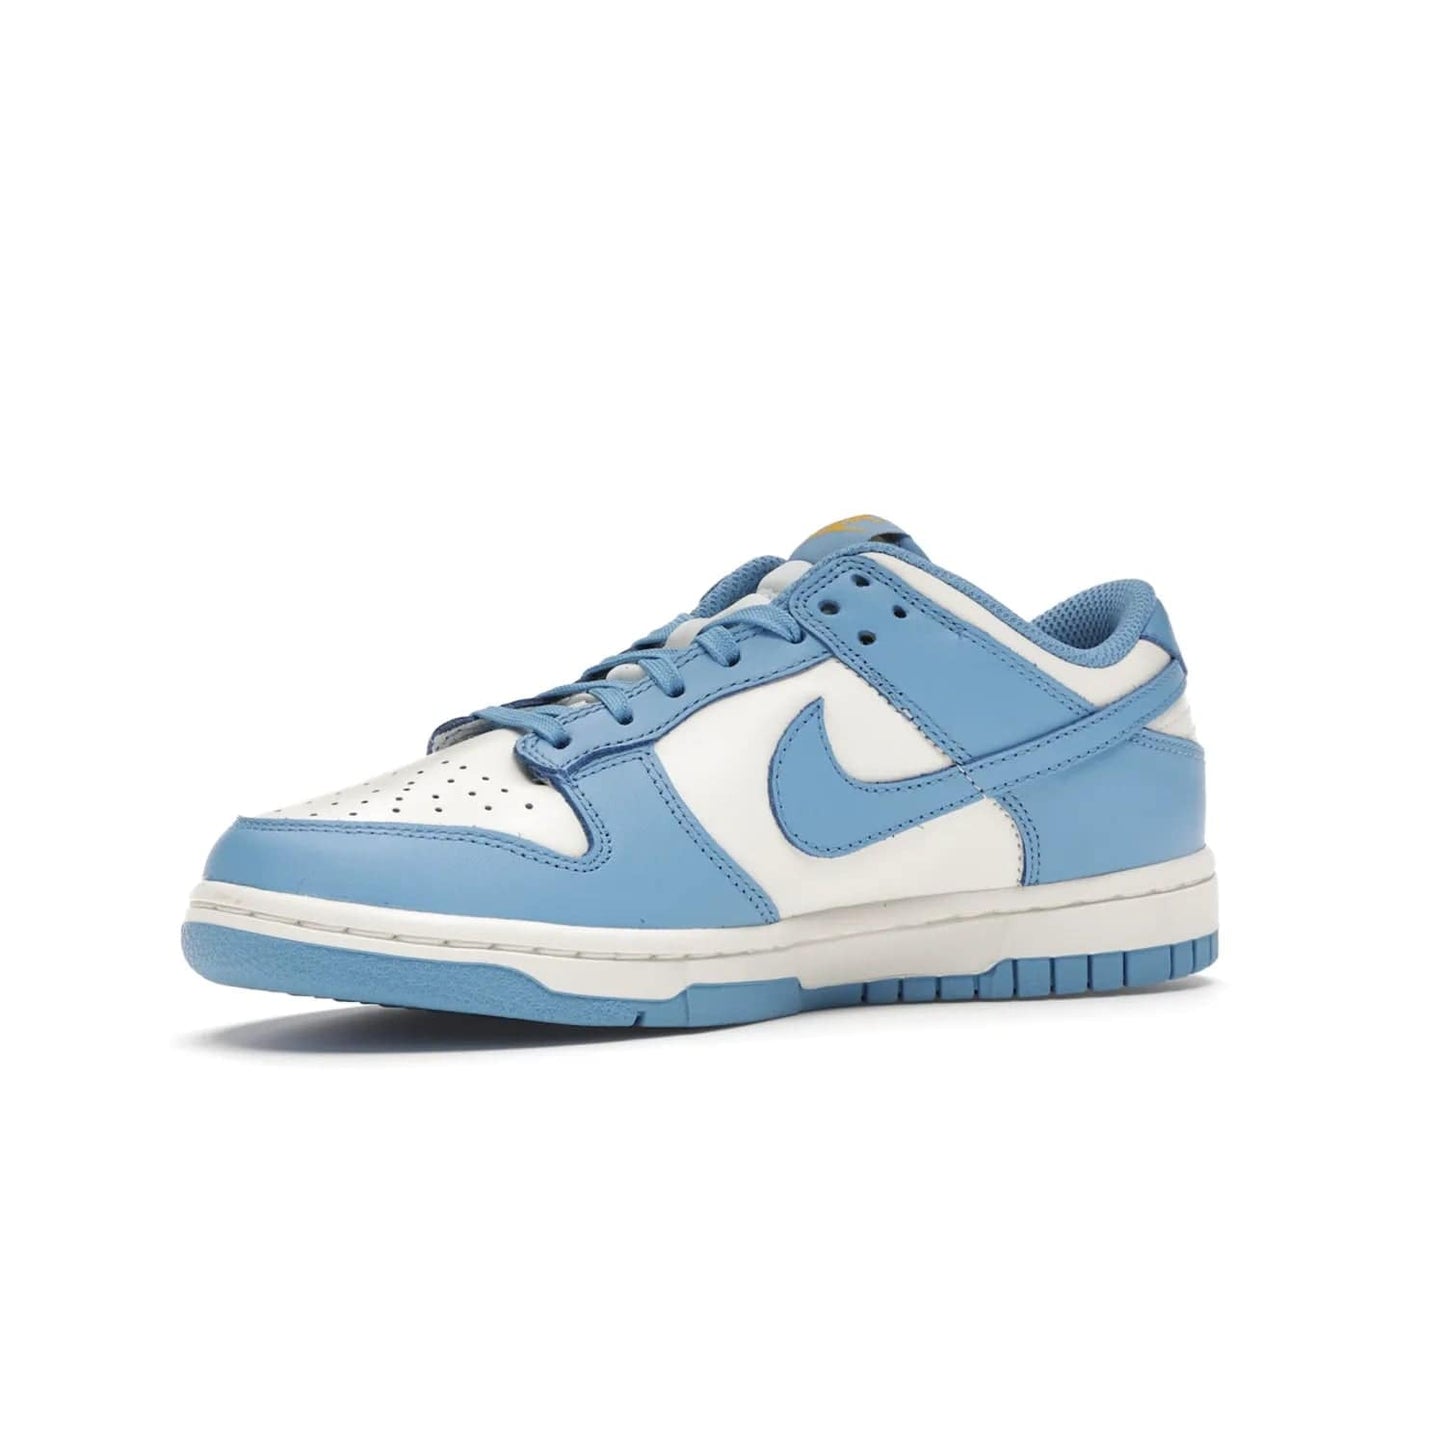 Nike Dunk Low Coast (Women's) - Image 16 - Only at www.BallersClubKickz.com - Iconic UCLA colors honor the west coast with the Nike Dunk Low Coast (Women's), a bold combo of light blue, white and yellow. Light leather upper with white midsole and light EVA outsole offer a modern twist. Released Feb 2021 for $100.